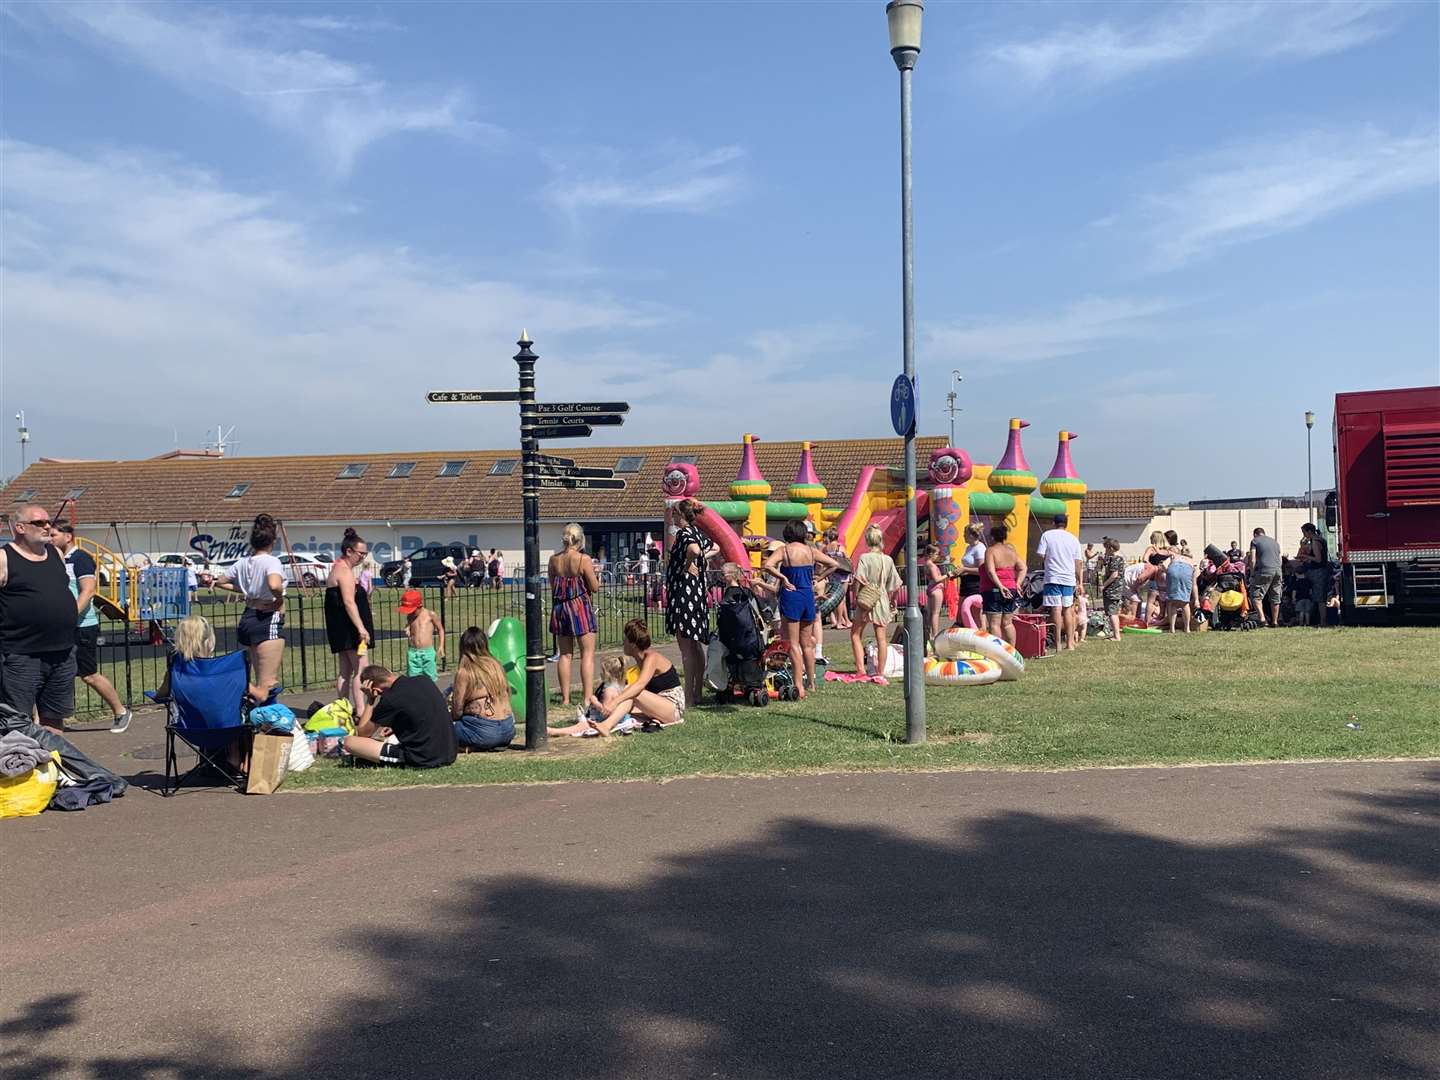 Queues are building at the Strand in Pier Approach, Gillingham, on Wednesday, July 24 (14228026)